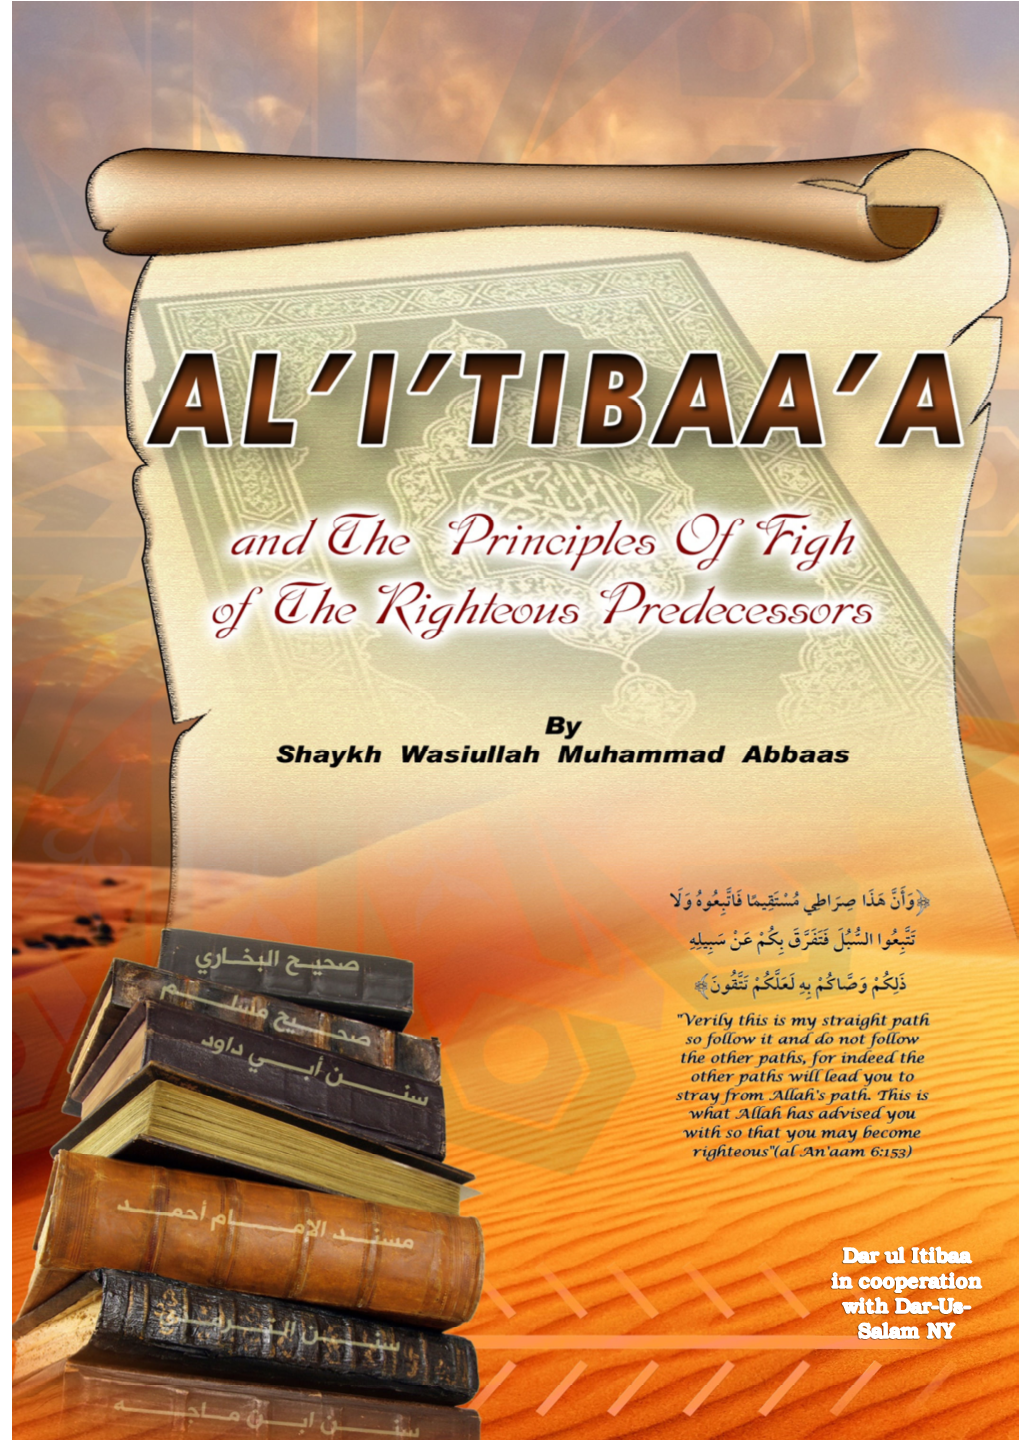 AL'i'tibba'a and the Principles of Fiqh of the Righteous Predecessors